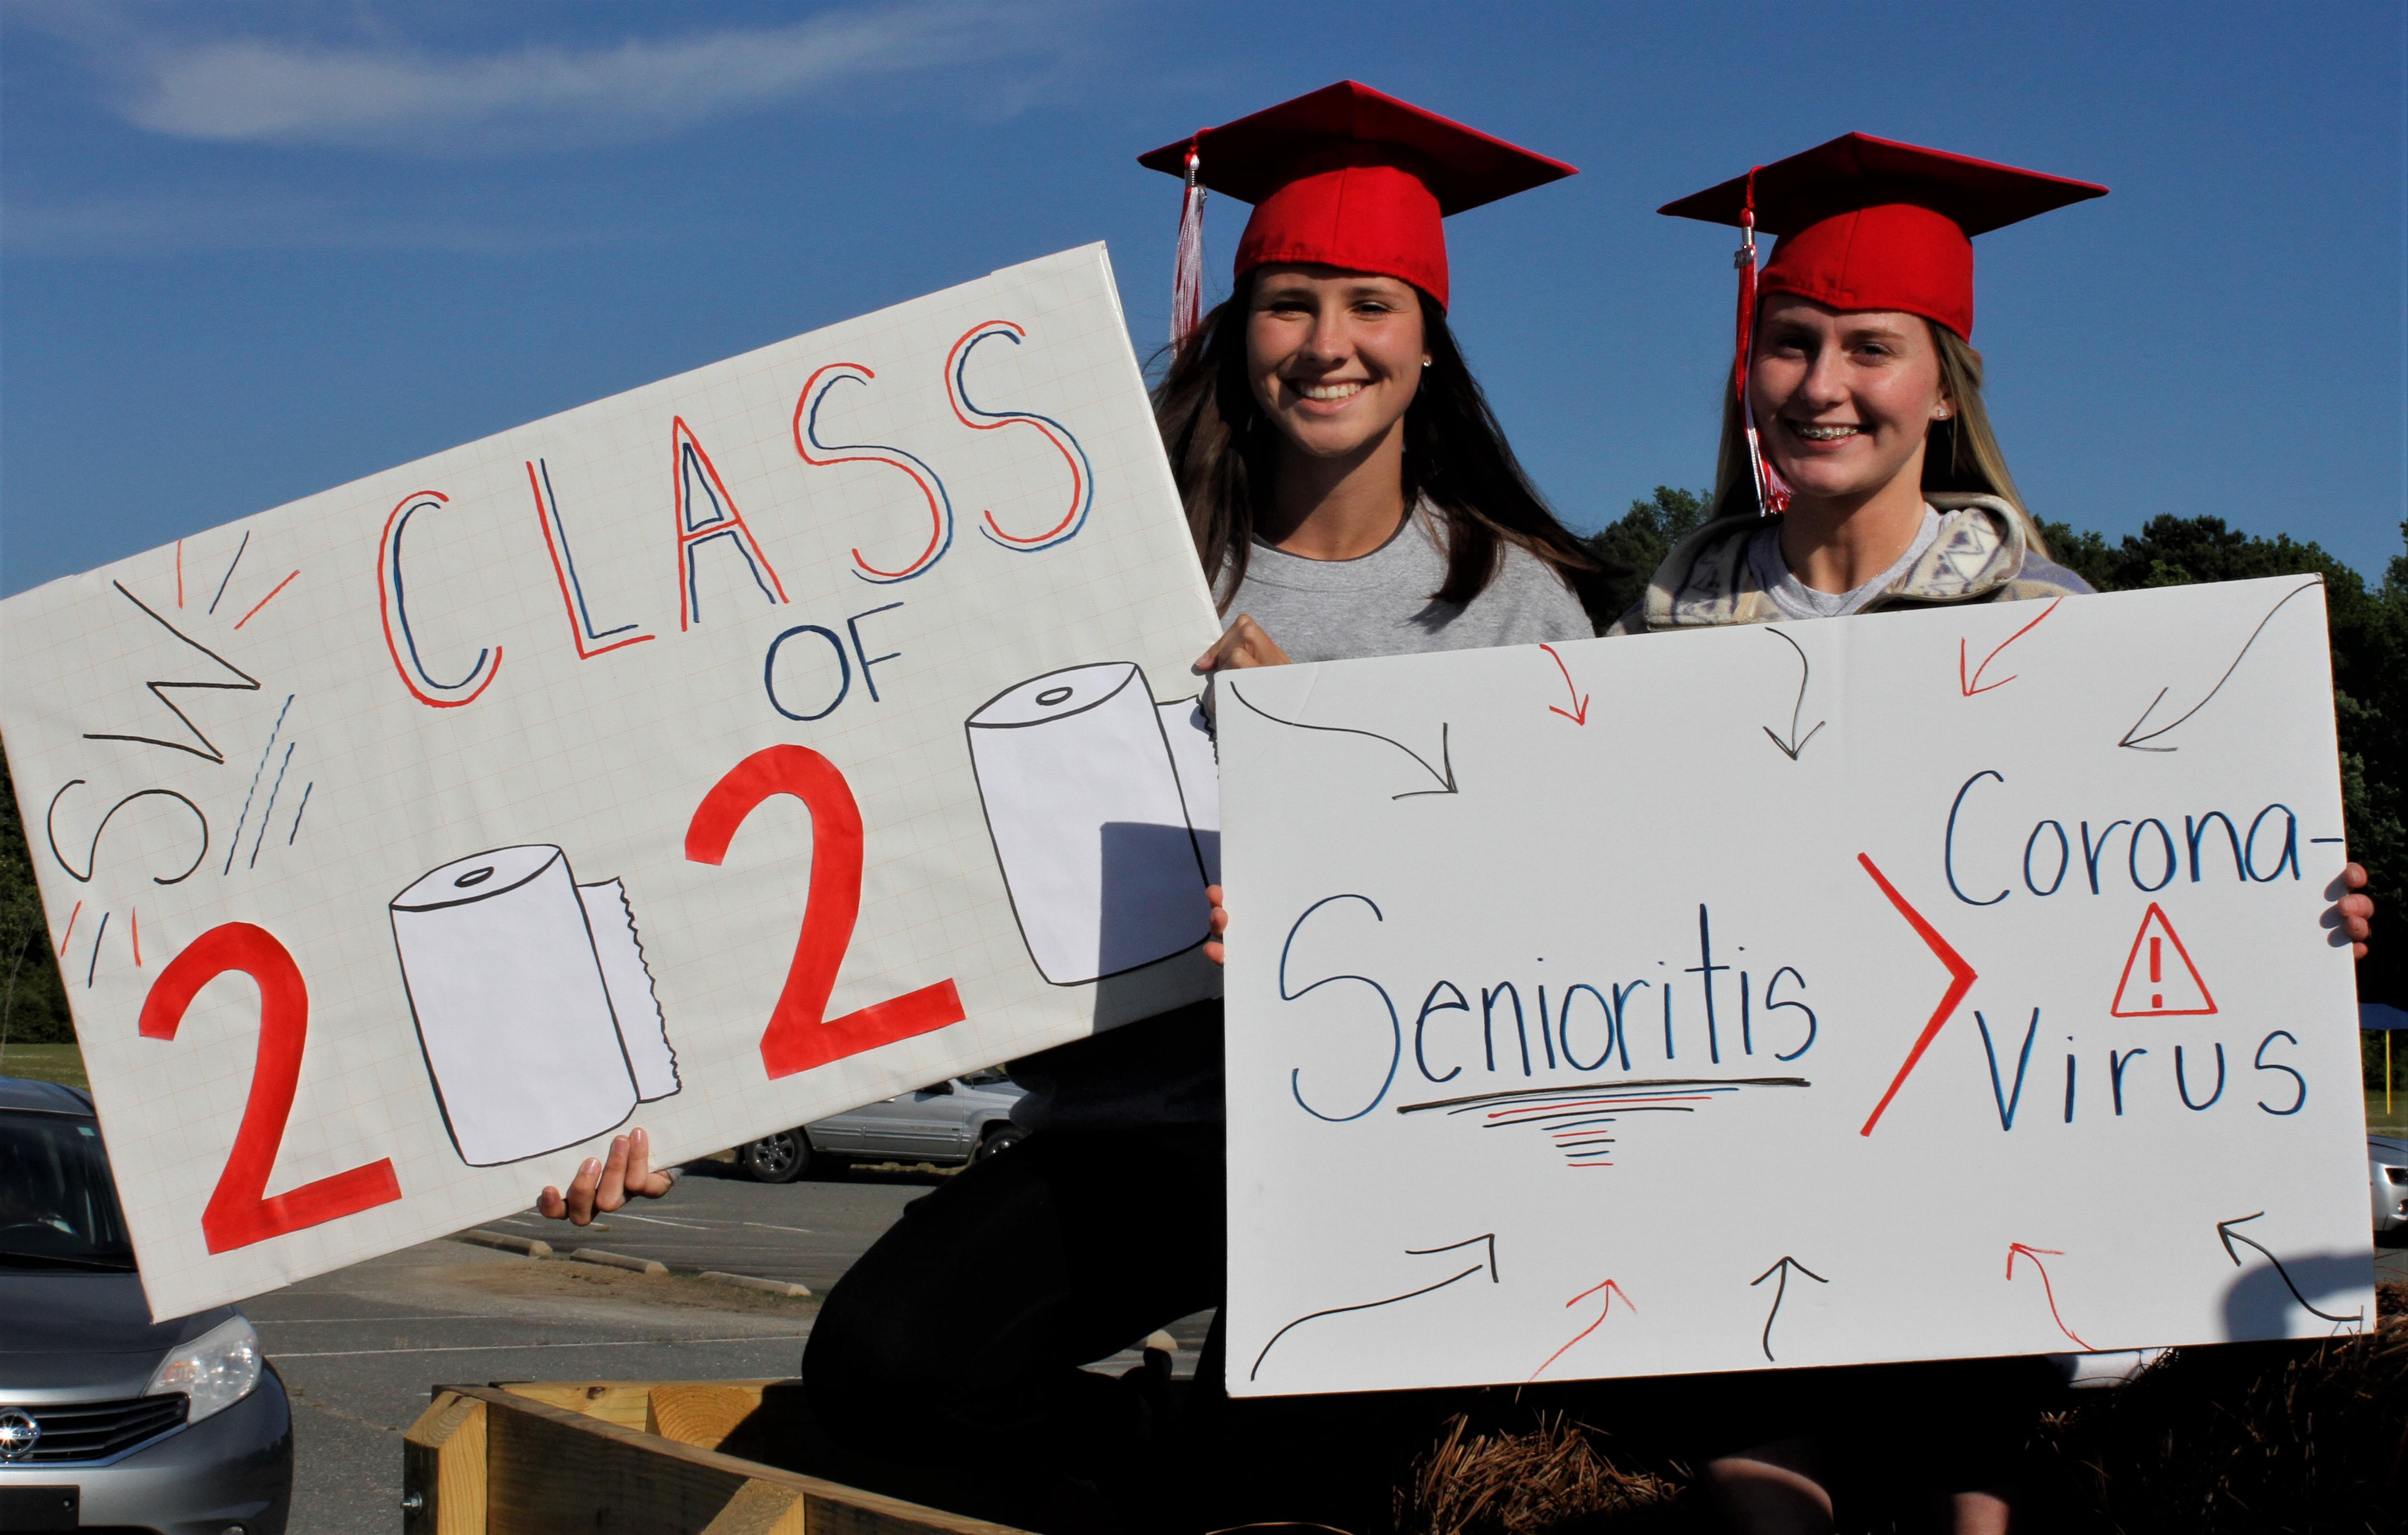 WCPS To Hold In-Person, On-Field Graduation Ceremonies